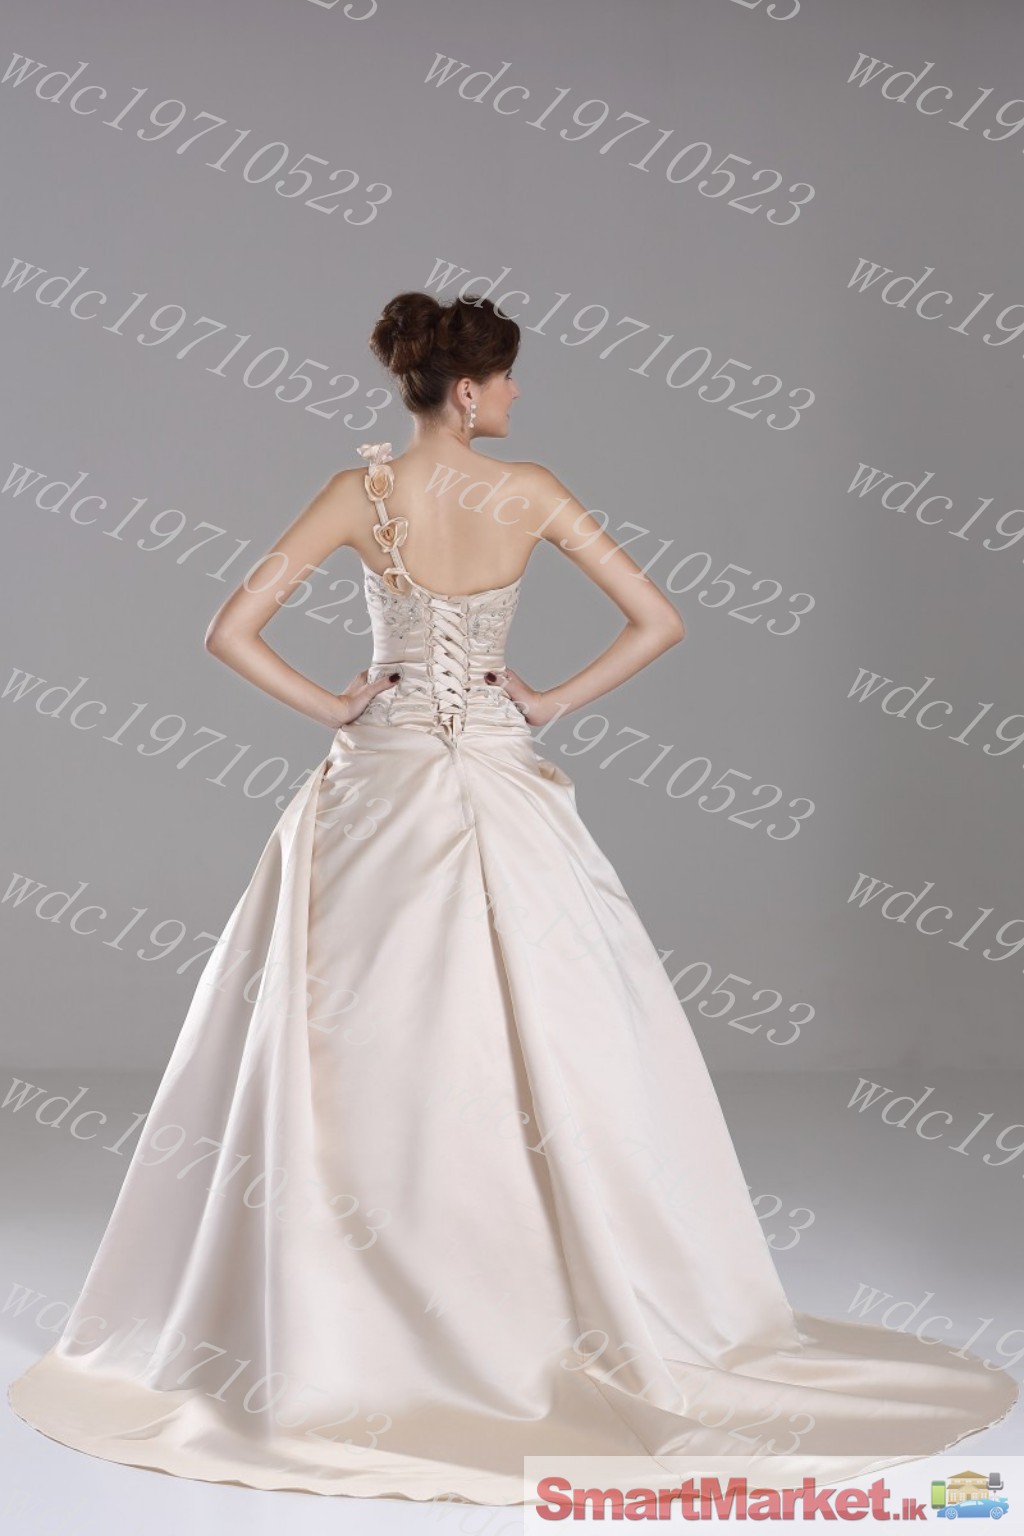 Cream Color Brand New Gorgeous Bridle Gown for quick sale